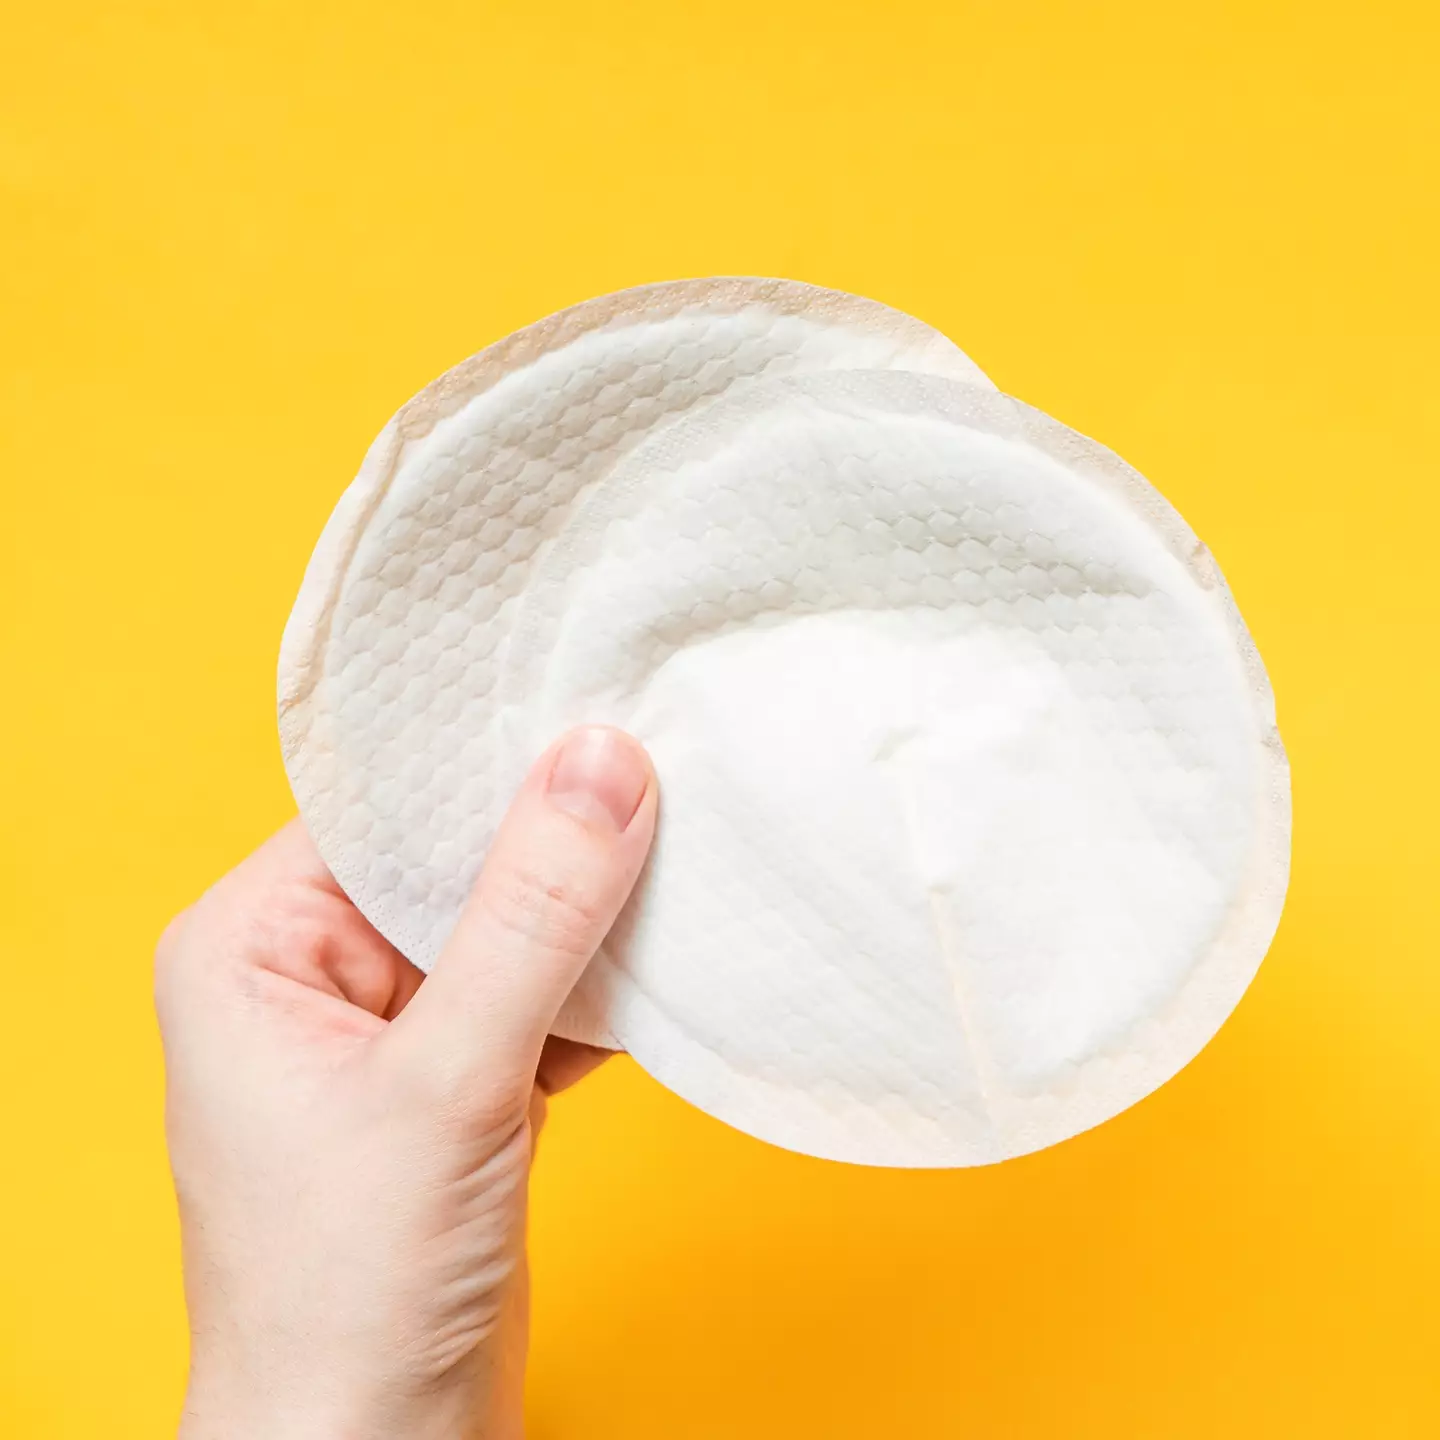 Breastfeeding pads 'work wonders' for dealing with boob sweat (